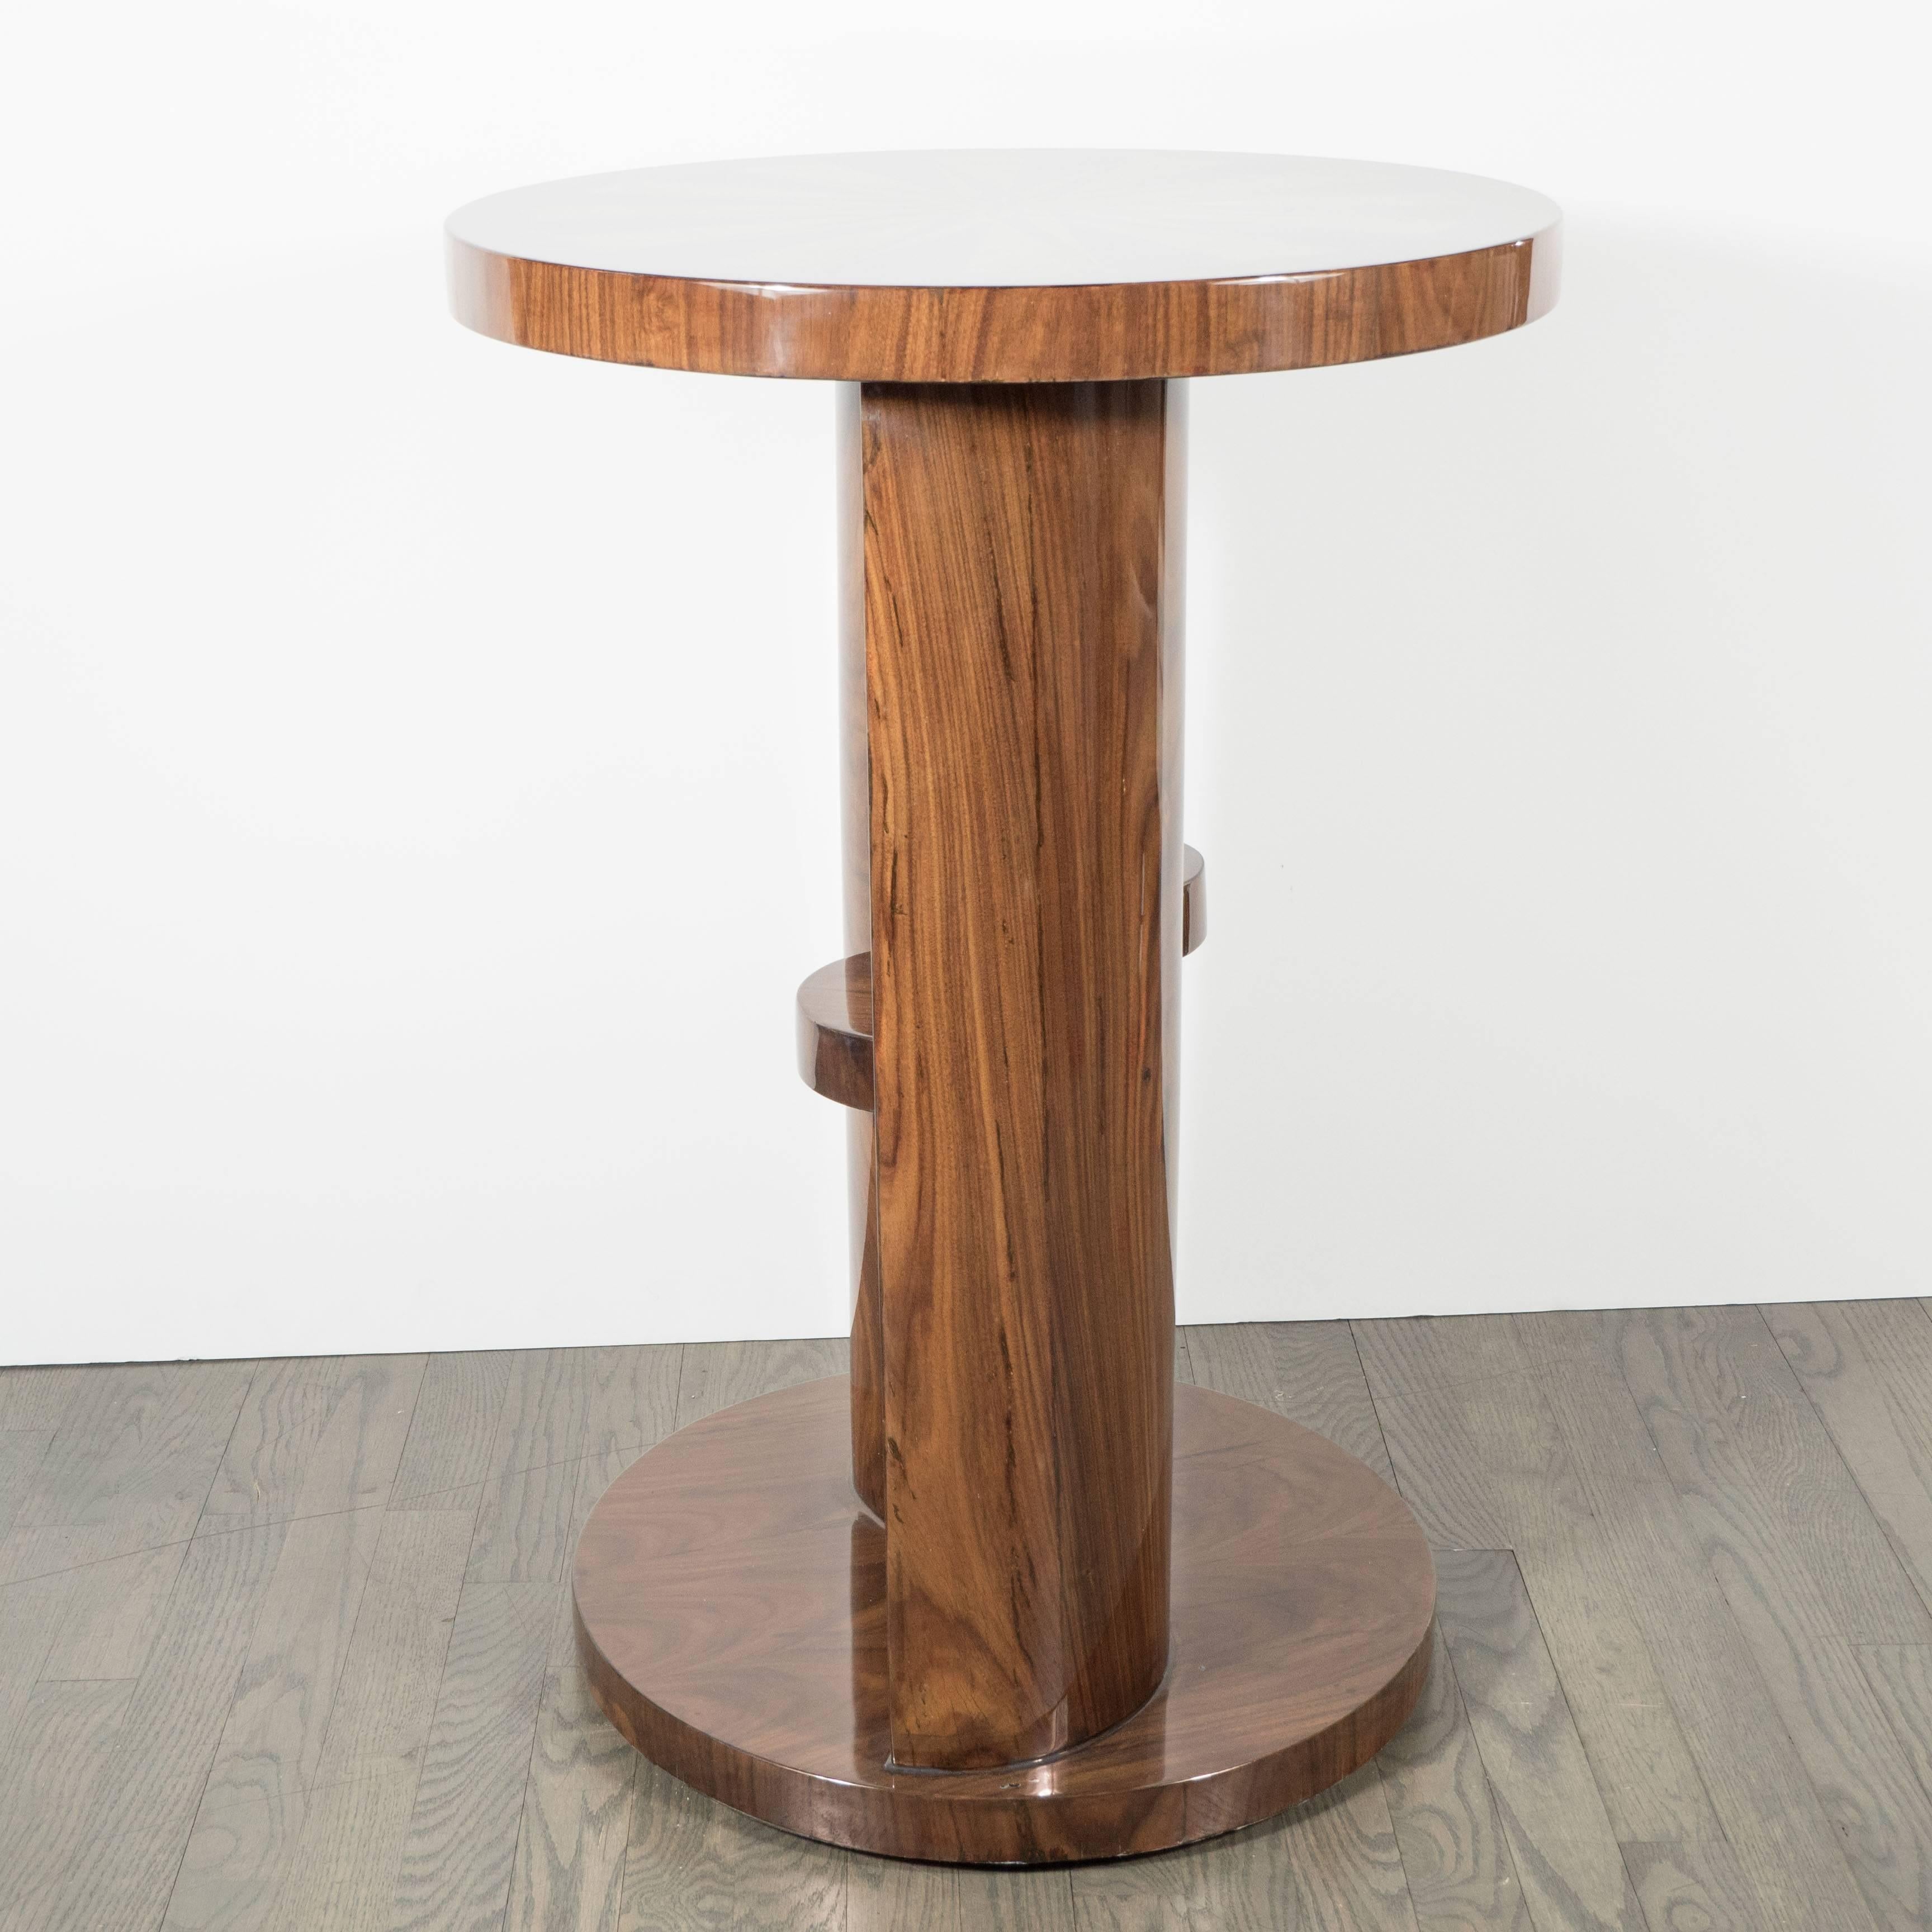 Mid-20th Century Art Deco Inlaid Starburst Table/ Pedestal in Bookmatched Burled Walnut & Elm For Sale